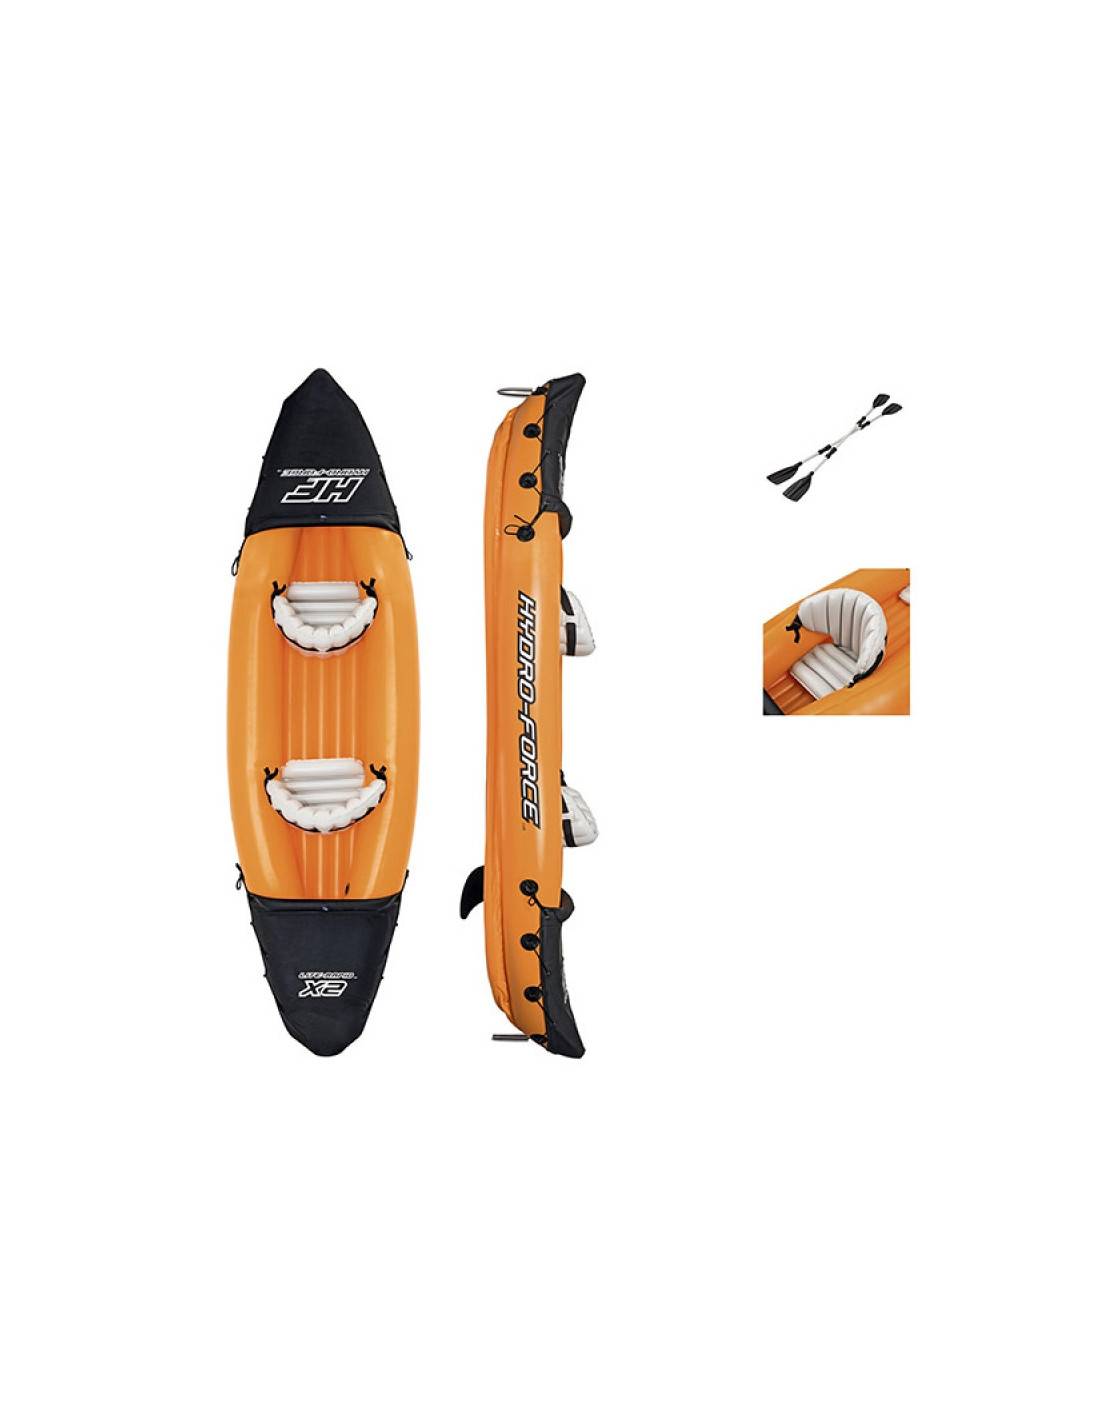 kayak gonflable cove champion hydro-force 275 x 81 cm